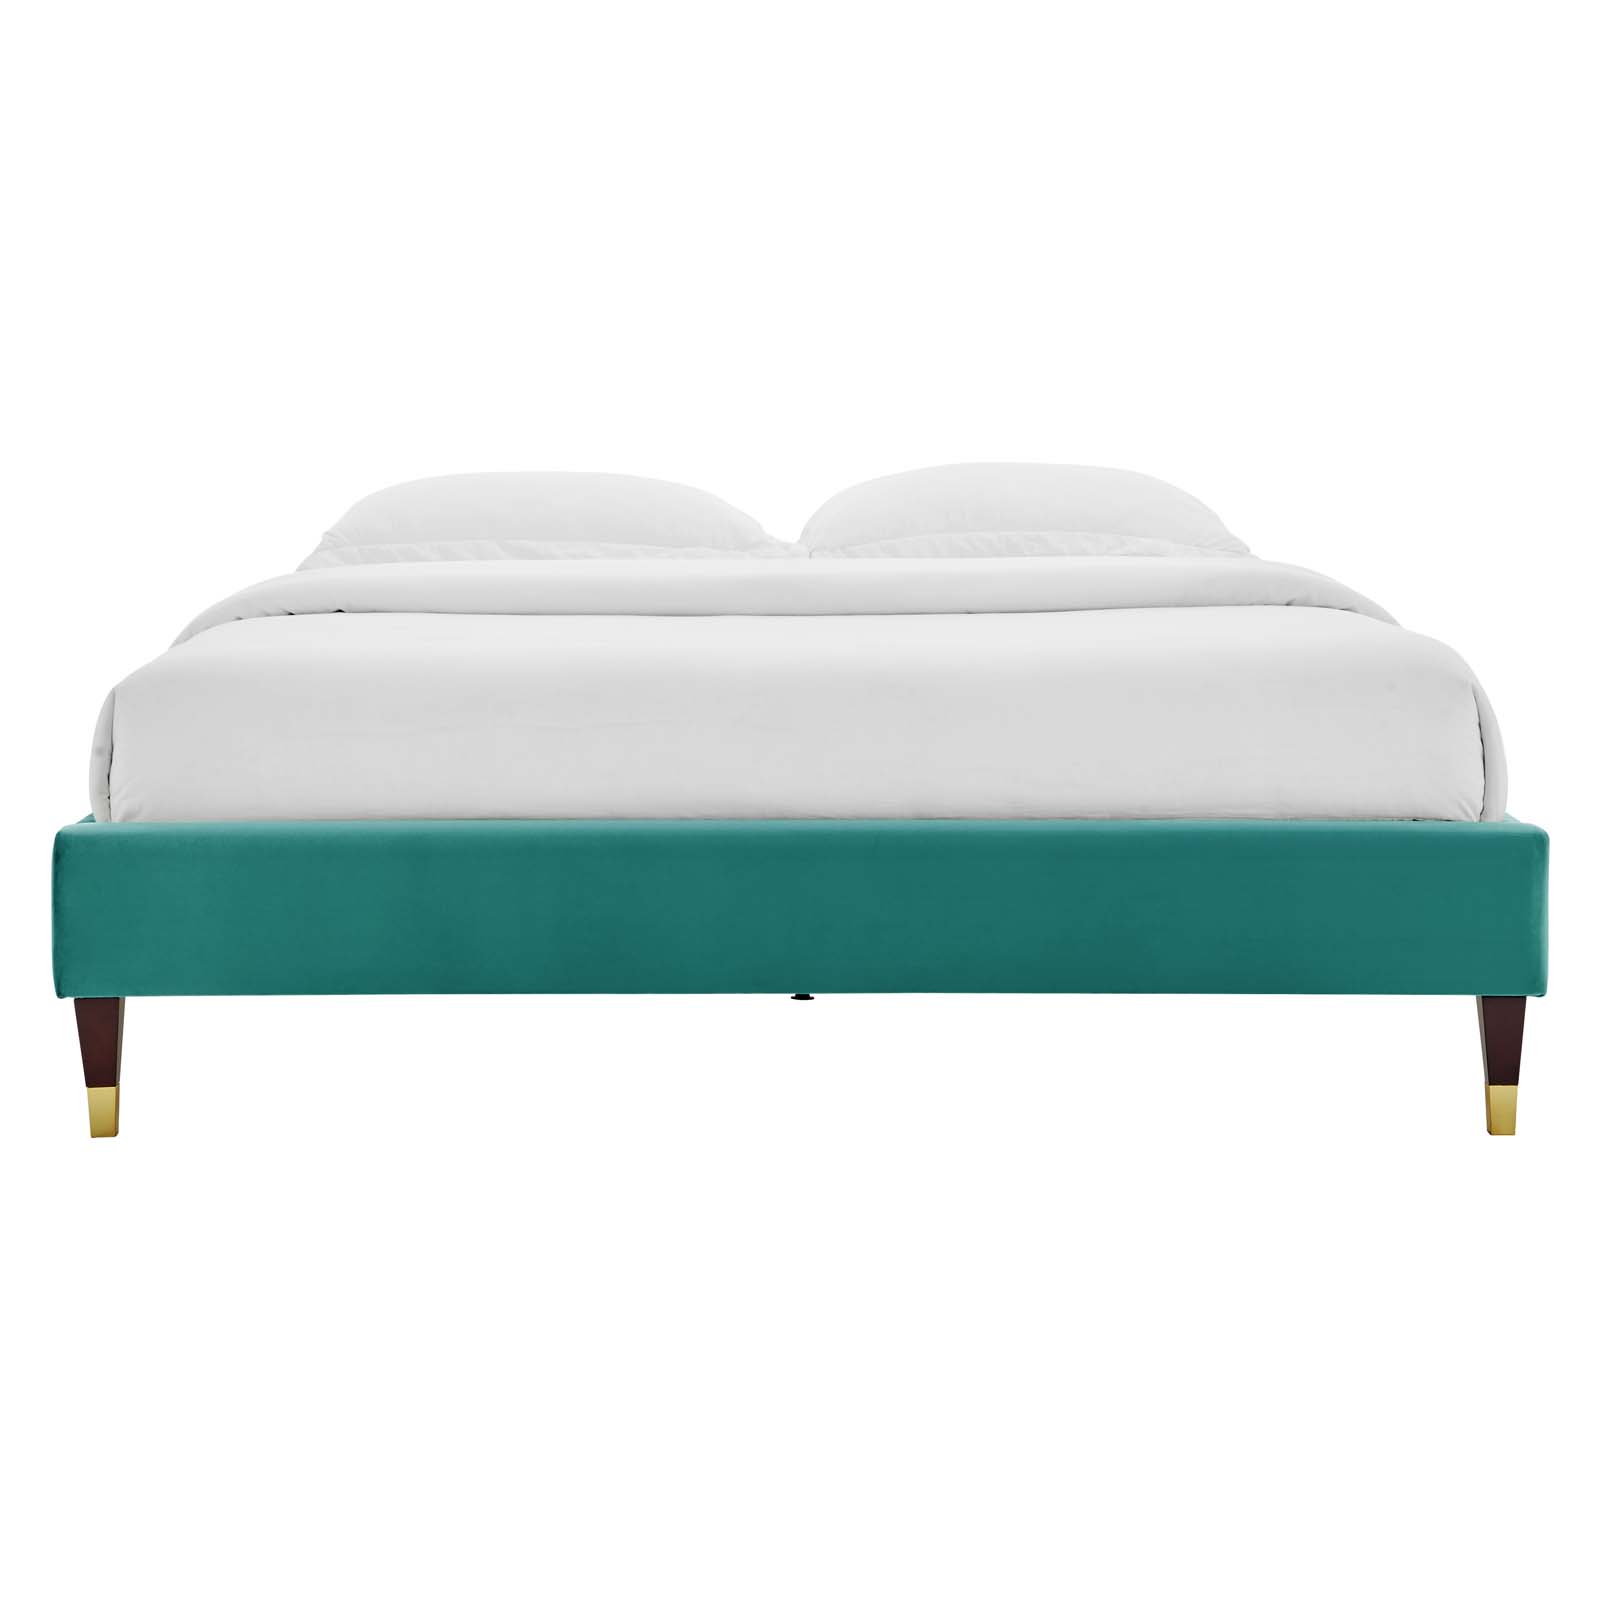 Modway Imports Harlow Twin Performance, Teal Twin Bed Frame